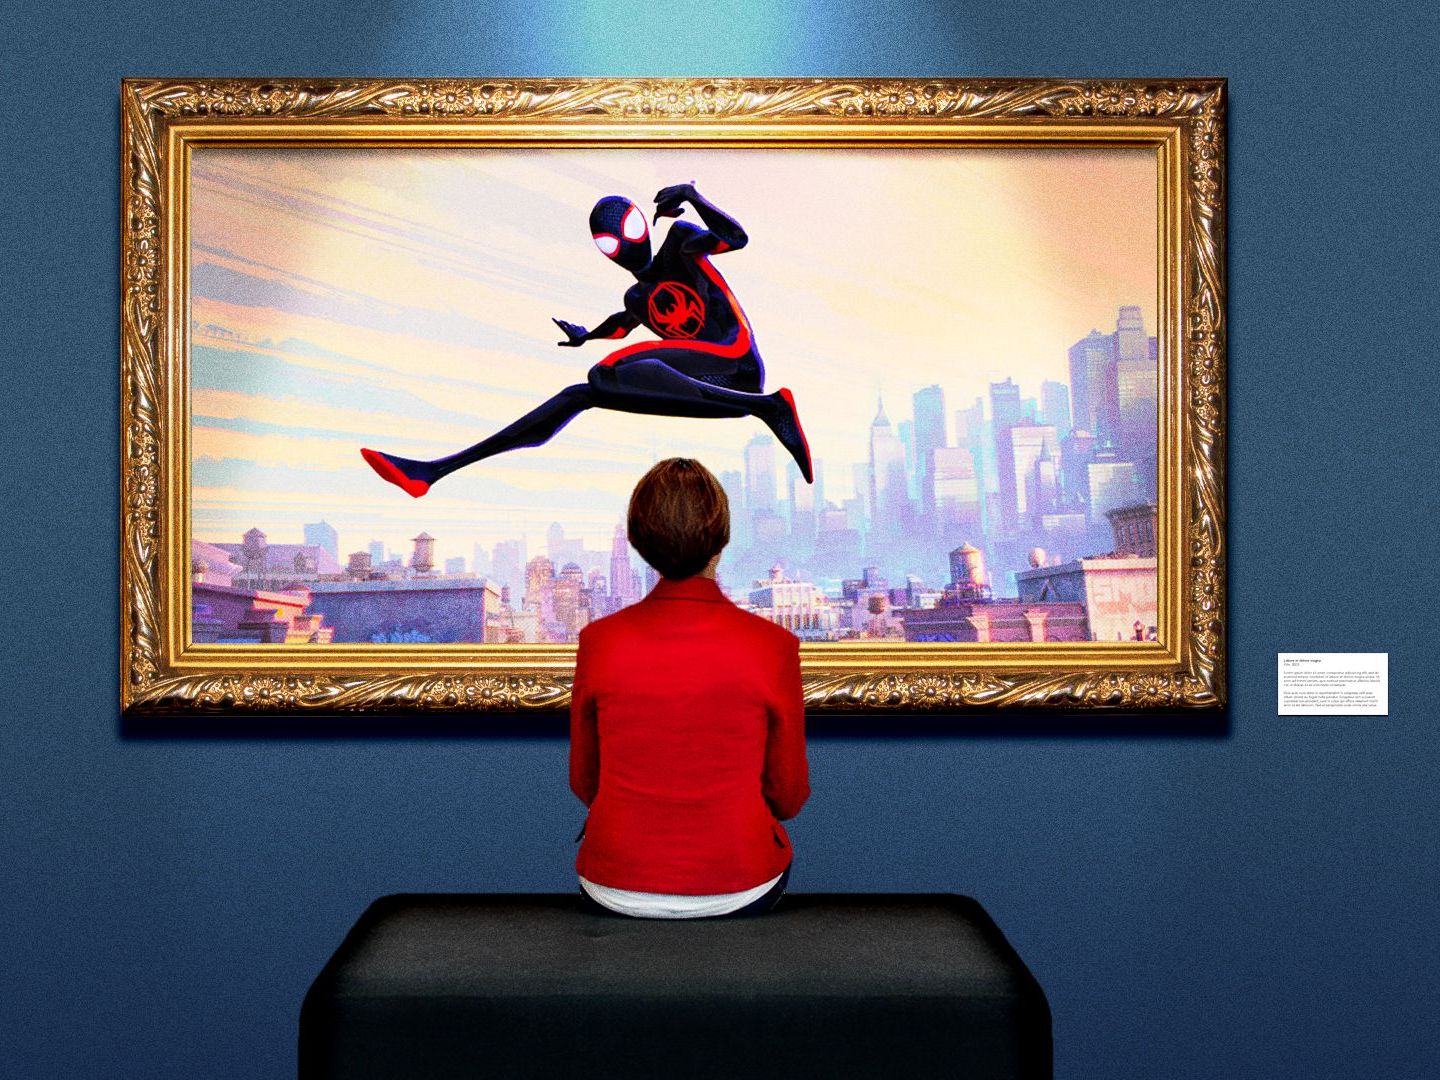 Spider-Man: Across the Spider-Verse defies boundaries of animation